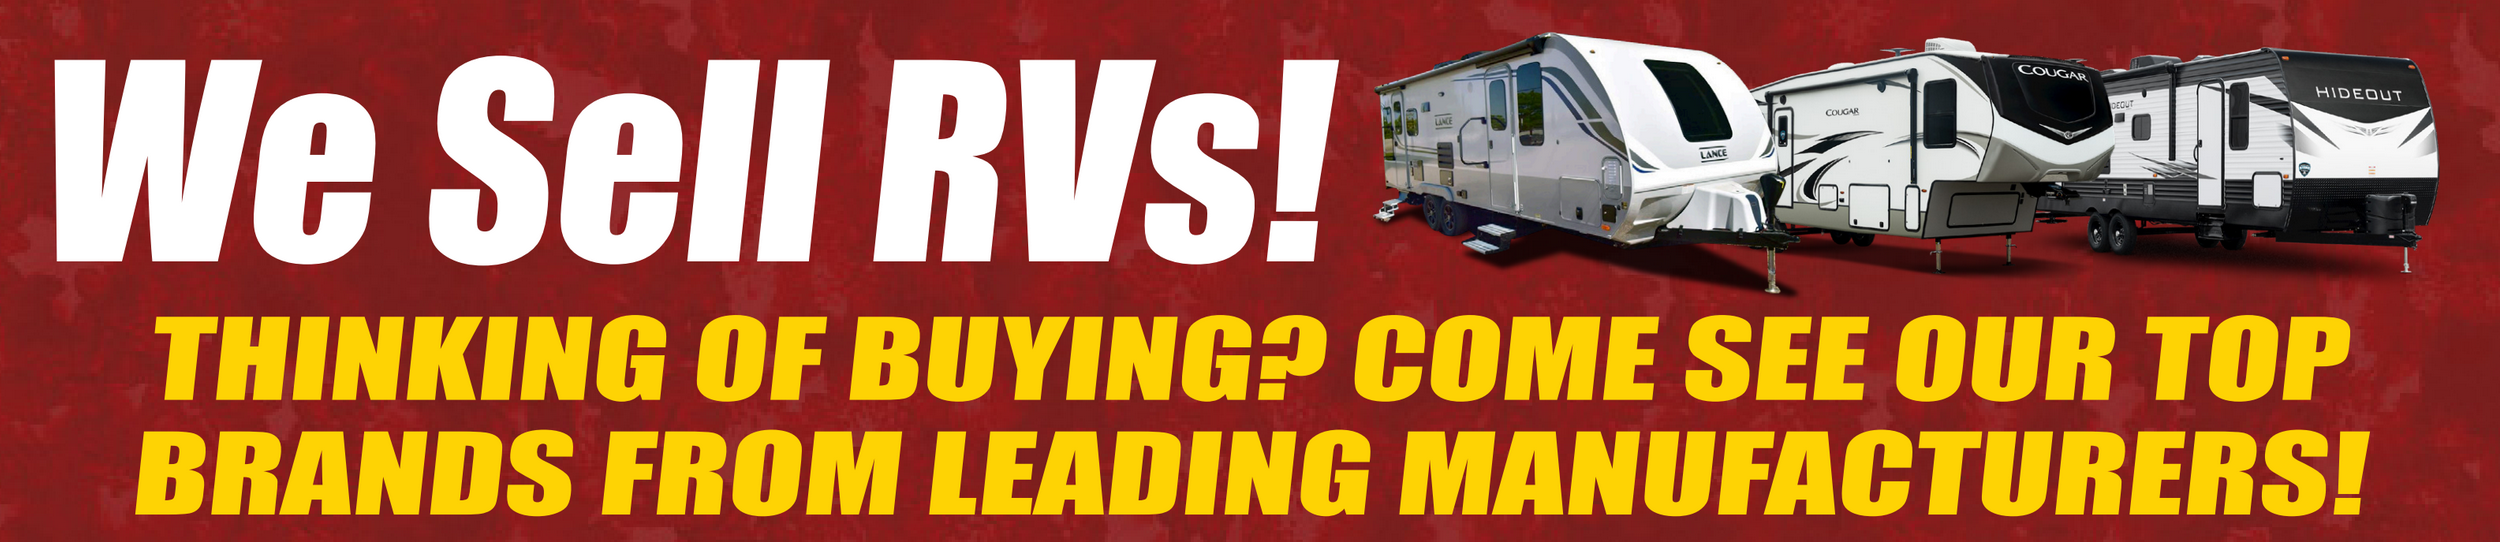 We sell RVs